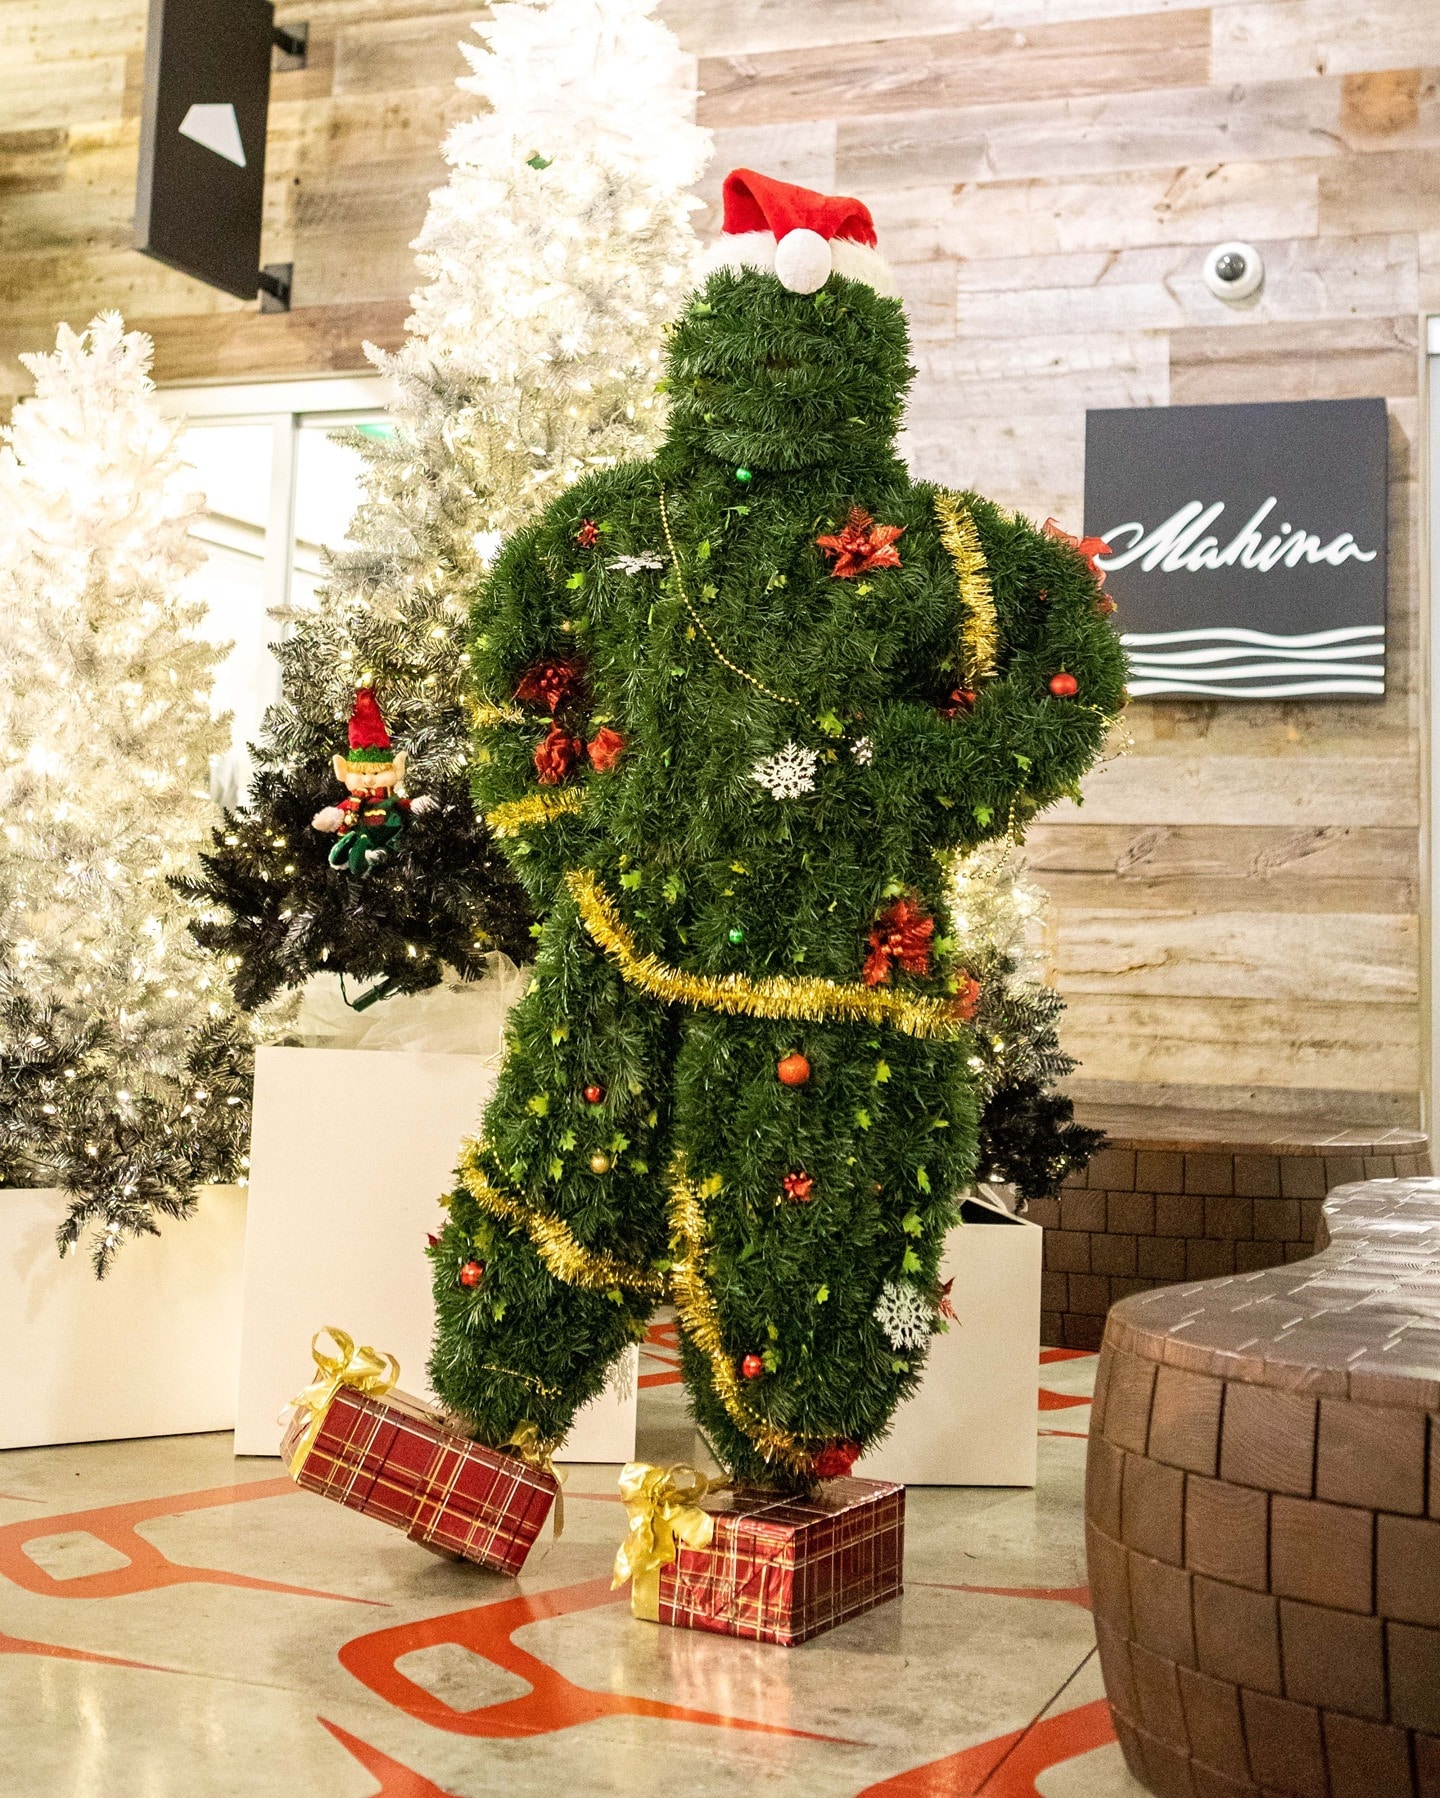 Relish more unique photo opps with our living holiday topiaries that have been decked out with lights and ornaments on Saturday from 3-6pm at South Shore Market. 📸 Look out for giant stockings in participating retailers' windows—that's where you'll find special stocking-sized merchandise just for you!